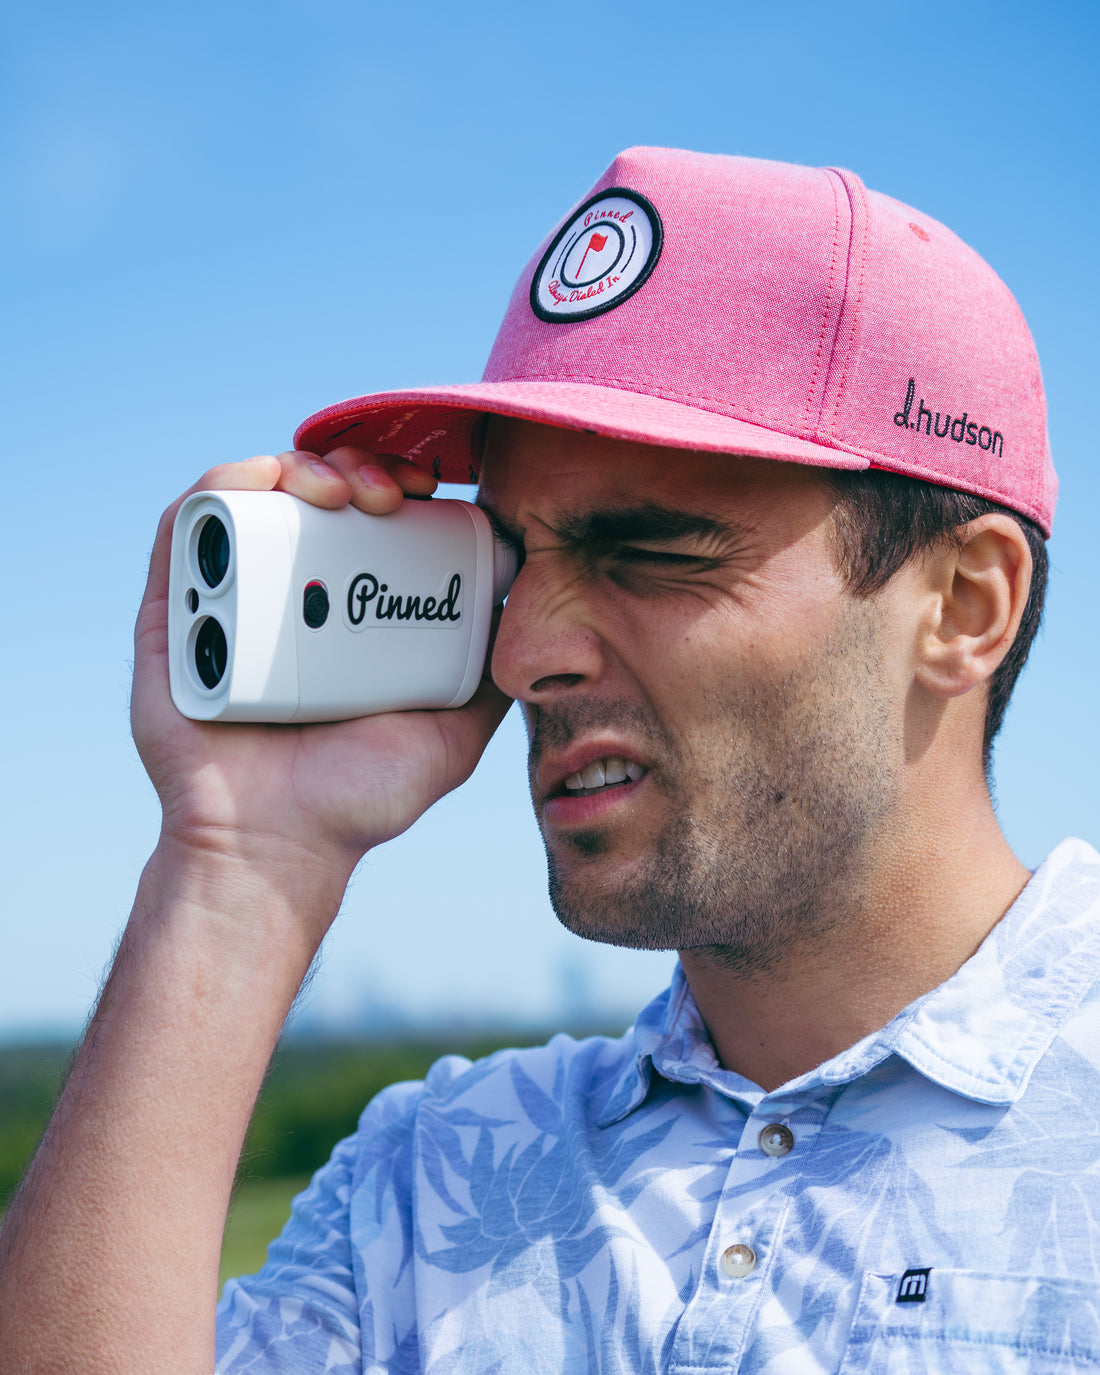 Interview with Pinned Golf CEO